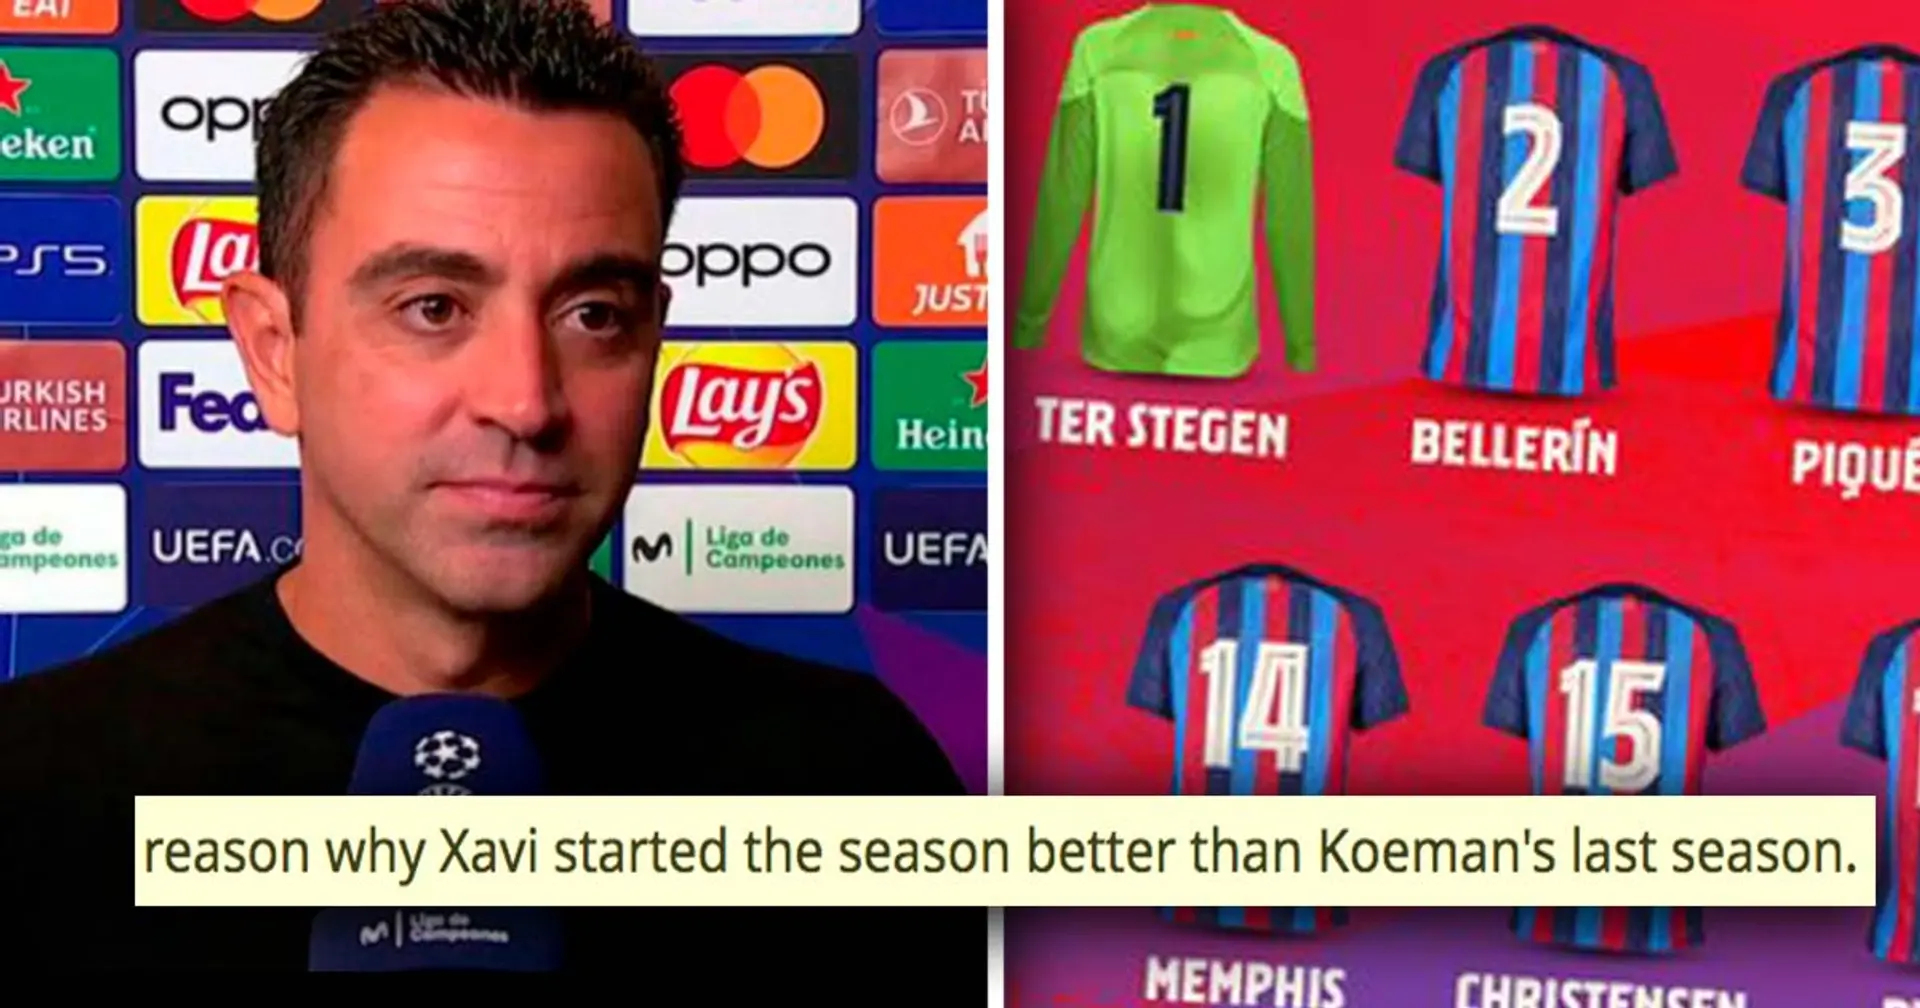 'We are the only such team in La Liga': Fan names one underrated reason behind Xavi's great season start